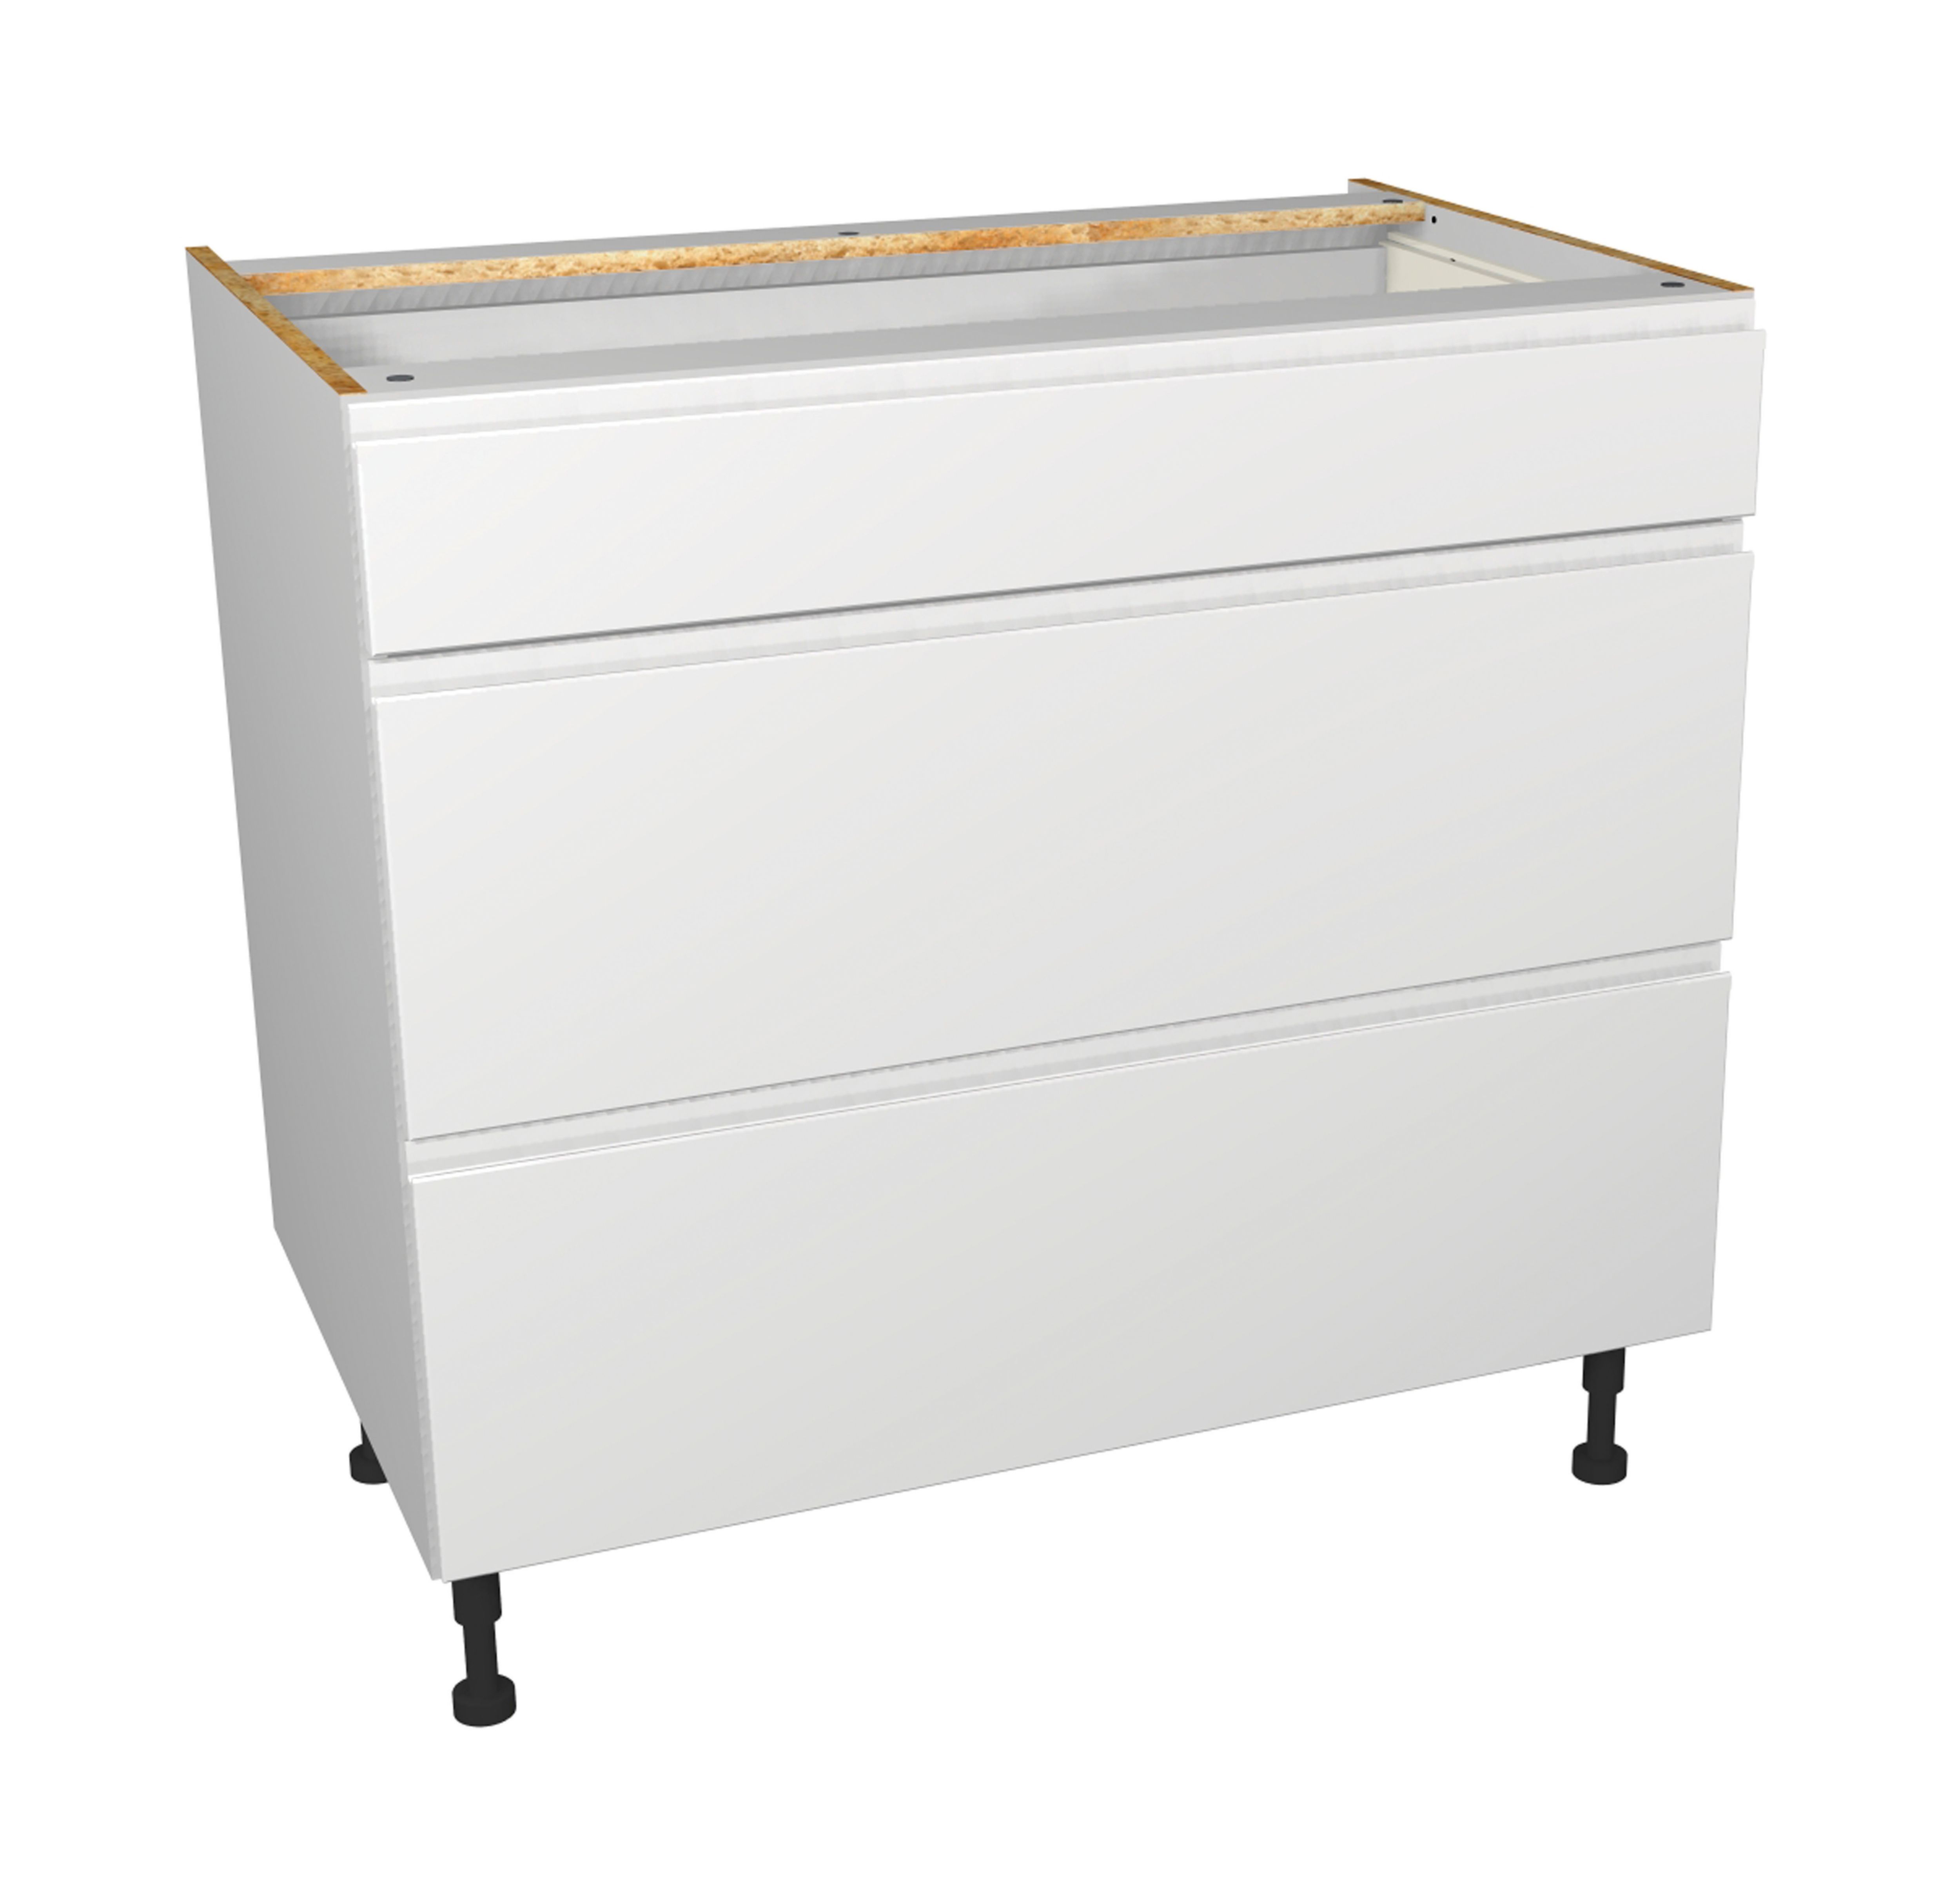 Image of Wickes Madison White Gloss Handleless Drawer Unit - 900mm Part 1 of 2